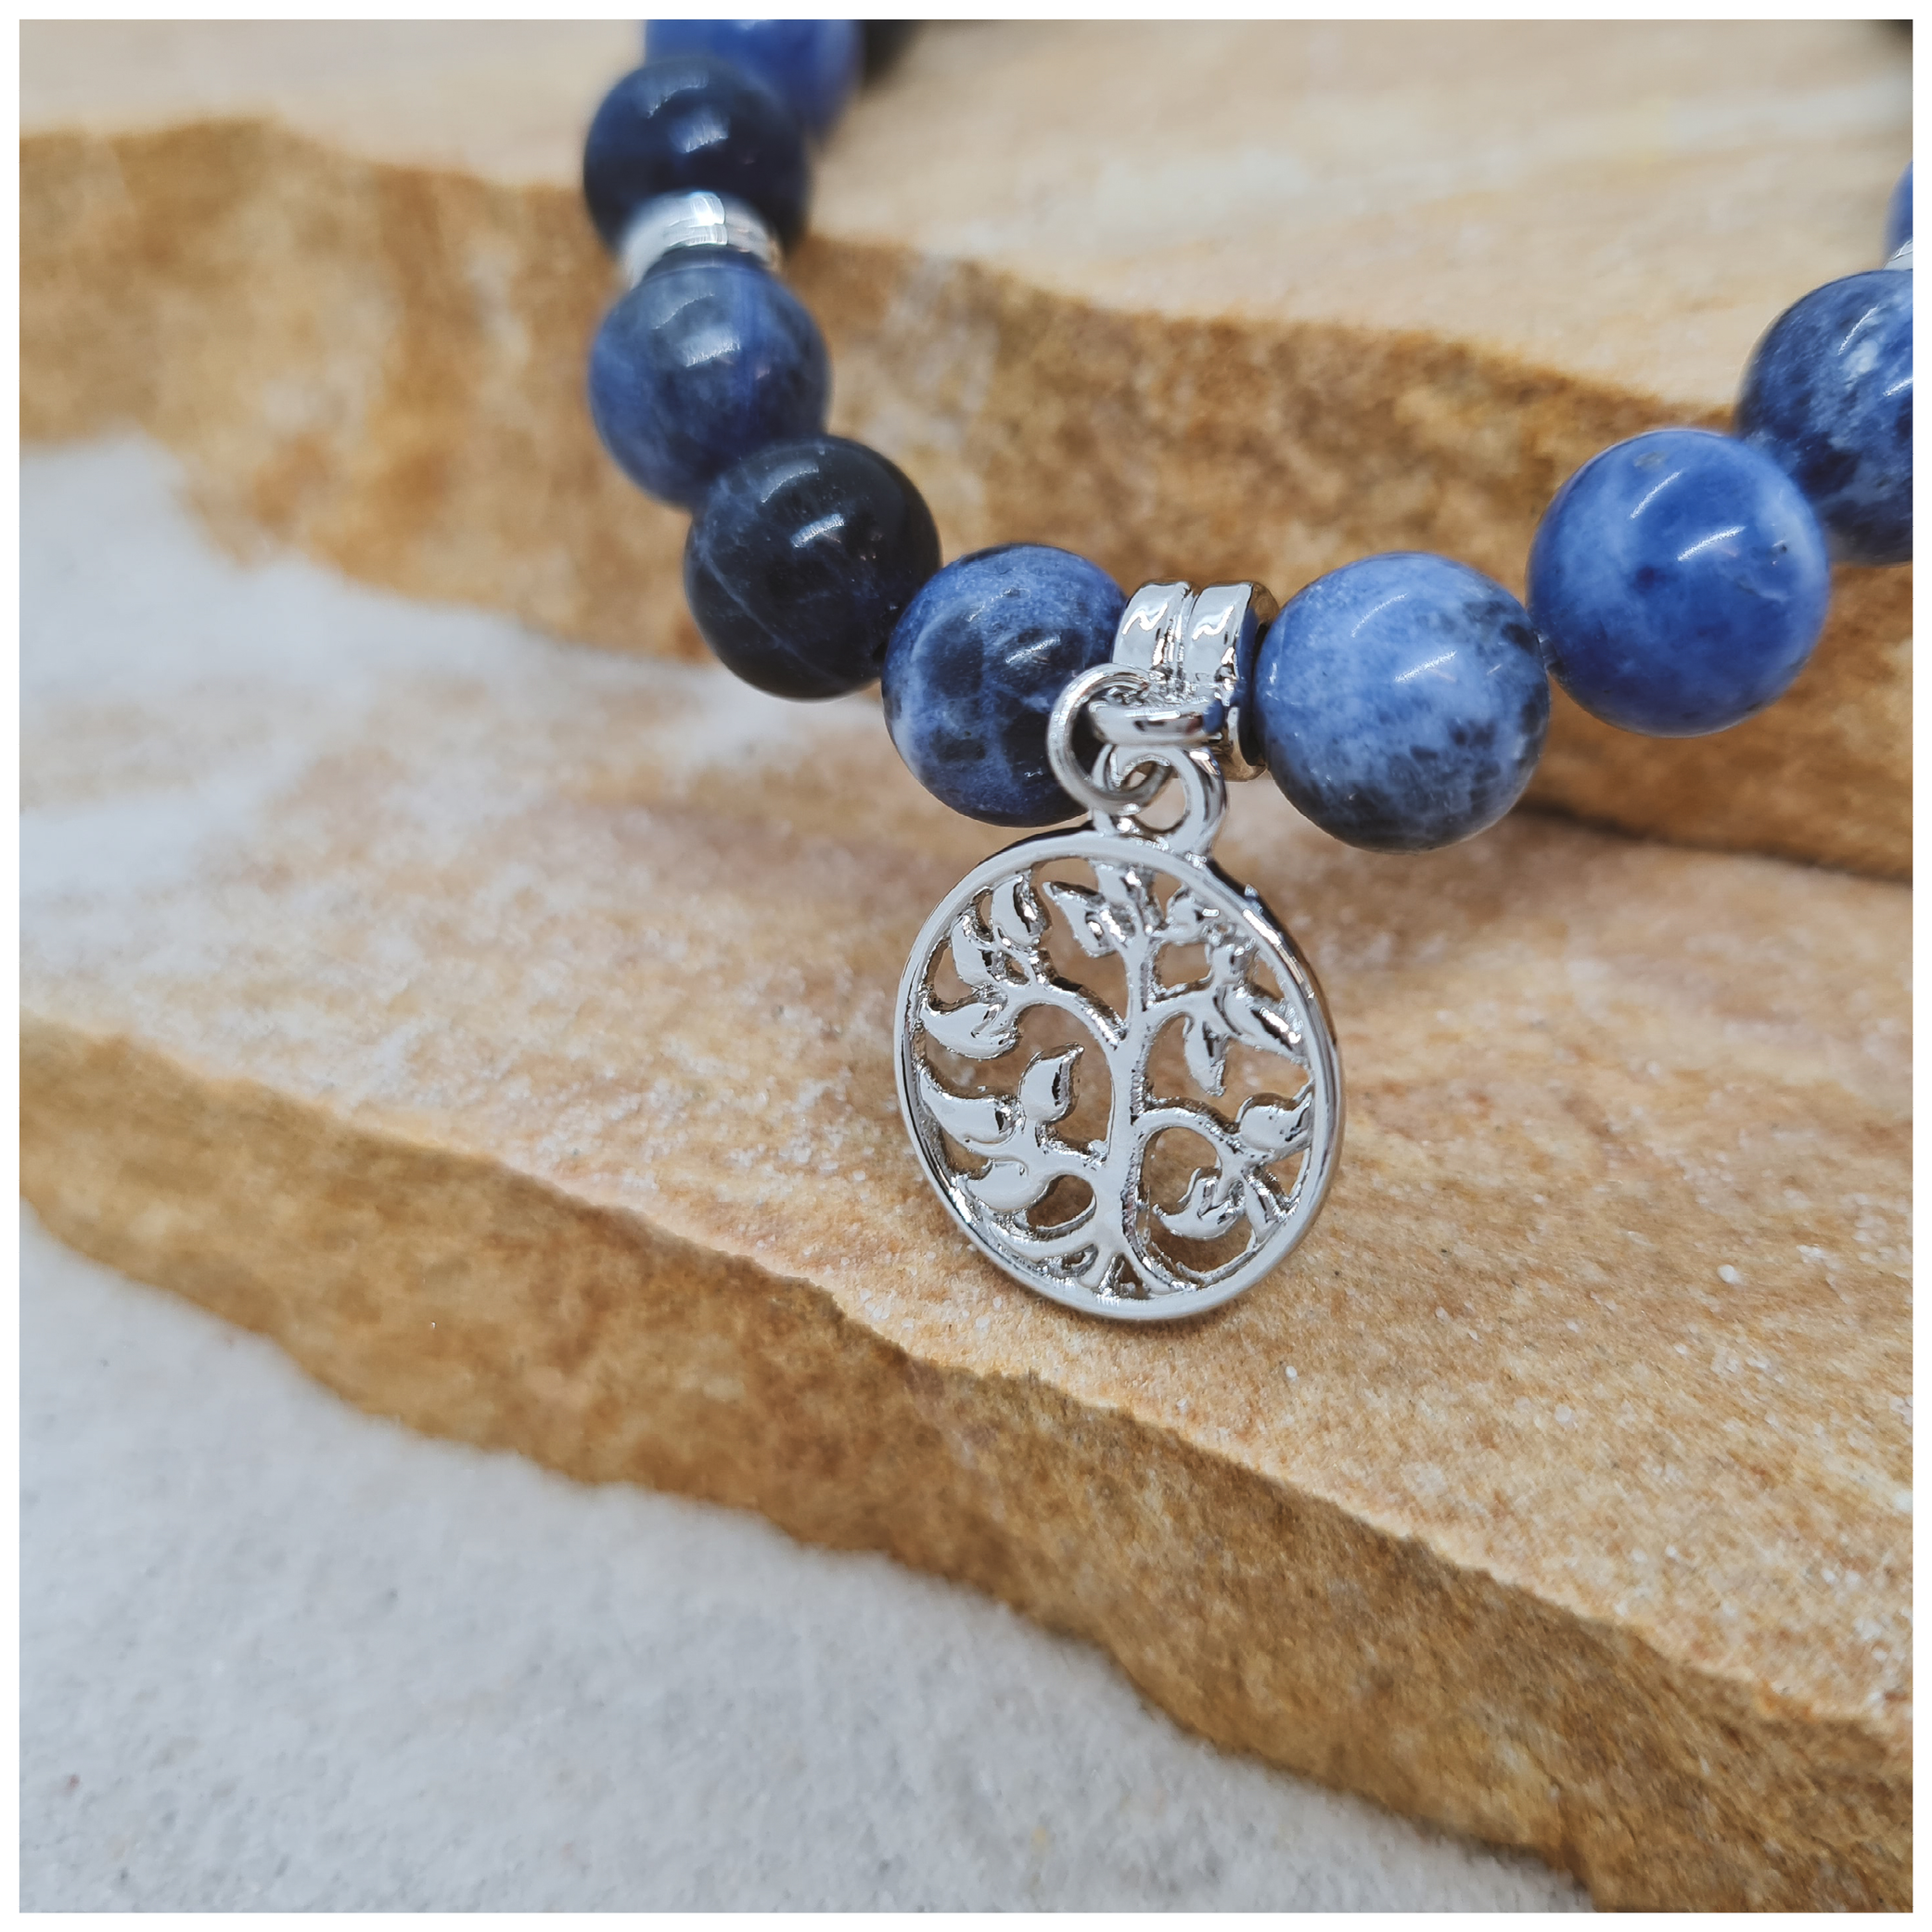 Sodalite 8mm crystal bead bracelet with silver tree of life charm